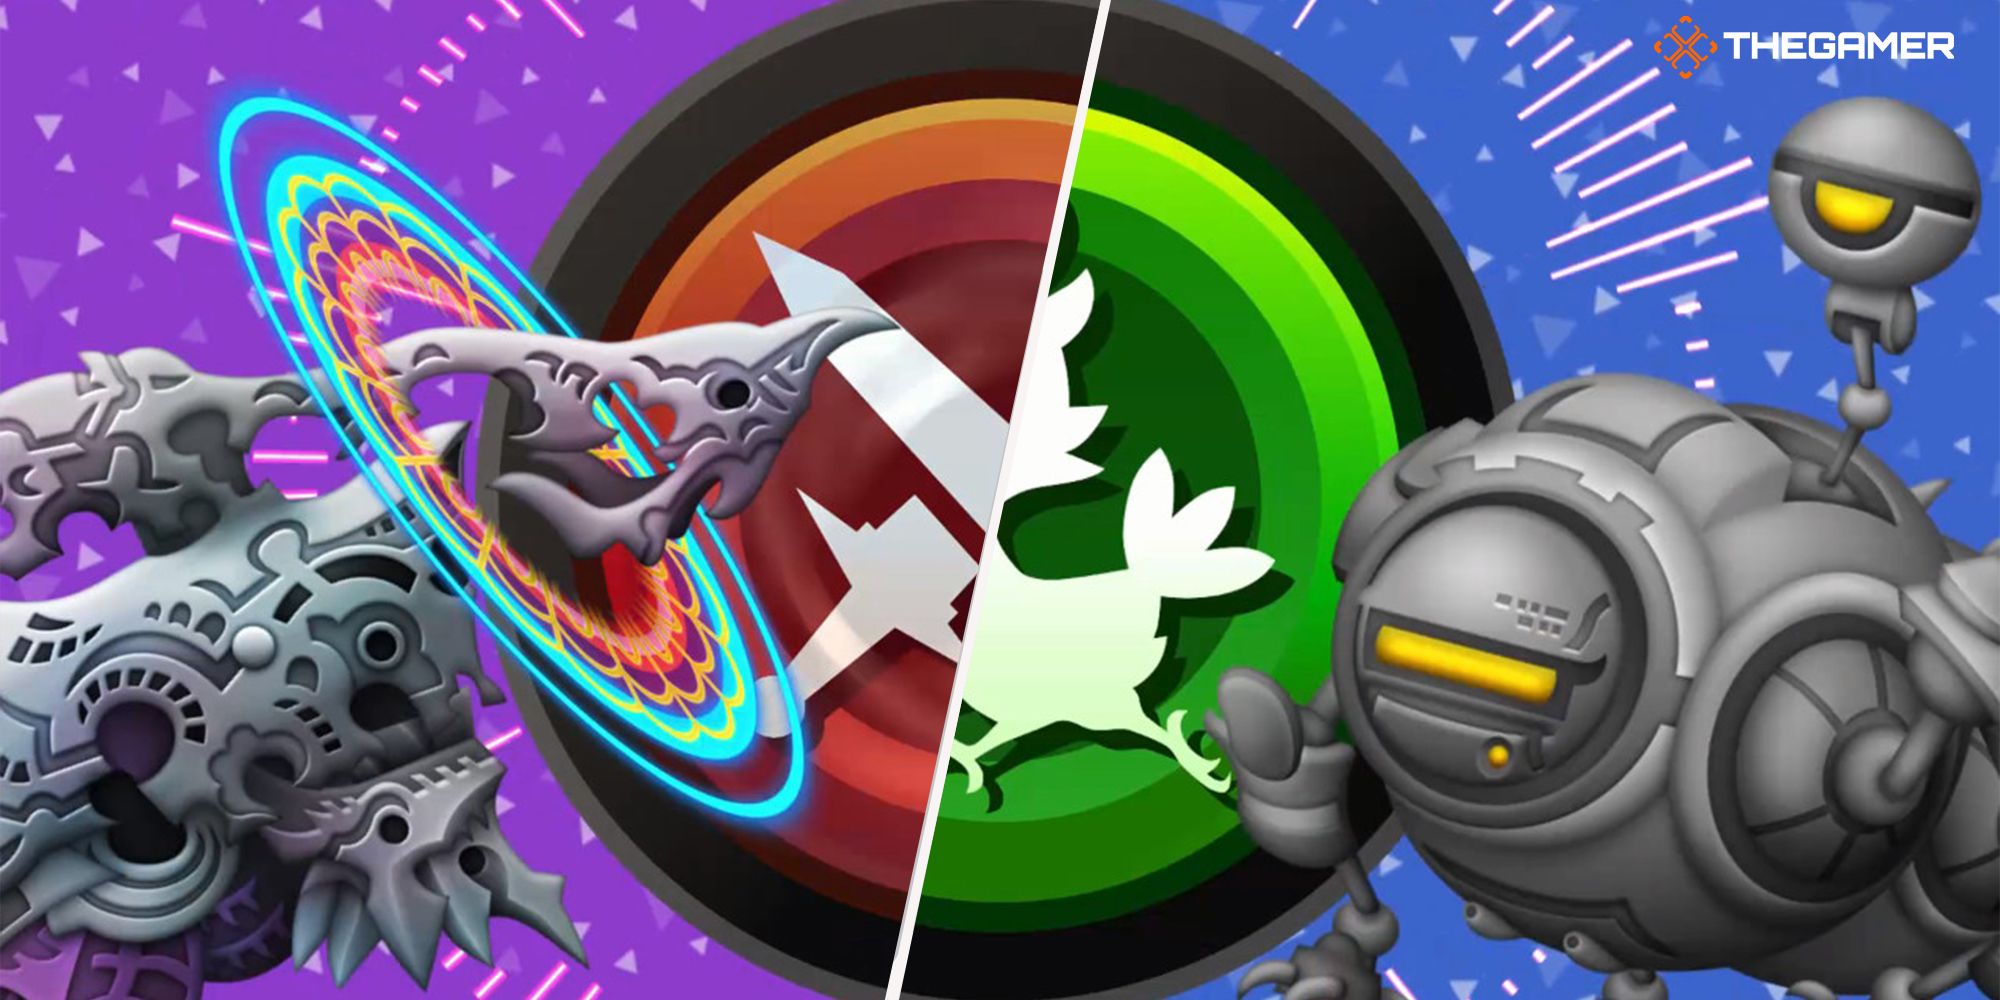 A mythical beast and a mechanical robot stand beside a split icon that represents both Battle Music Stages and Field Music Stages in Theatrhythm: Final Bar Line.